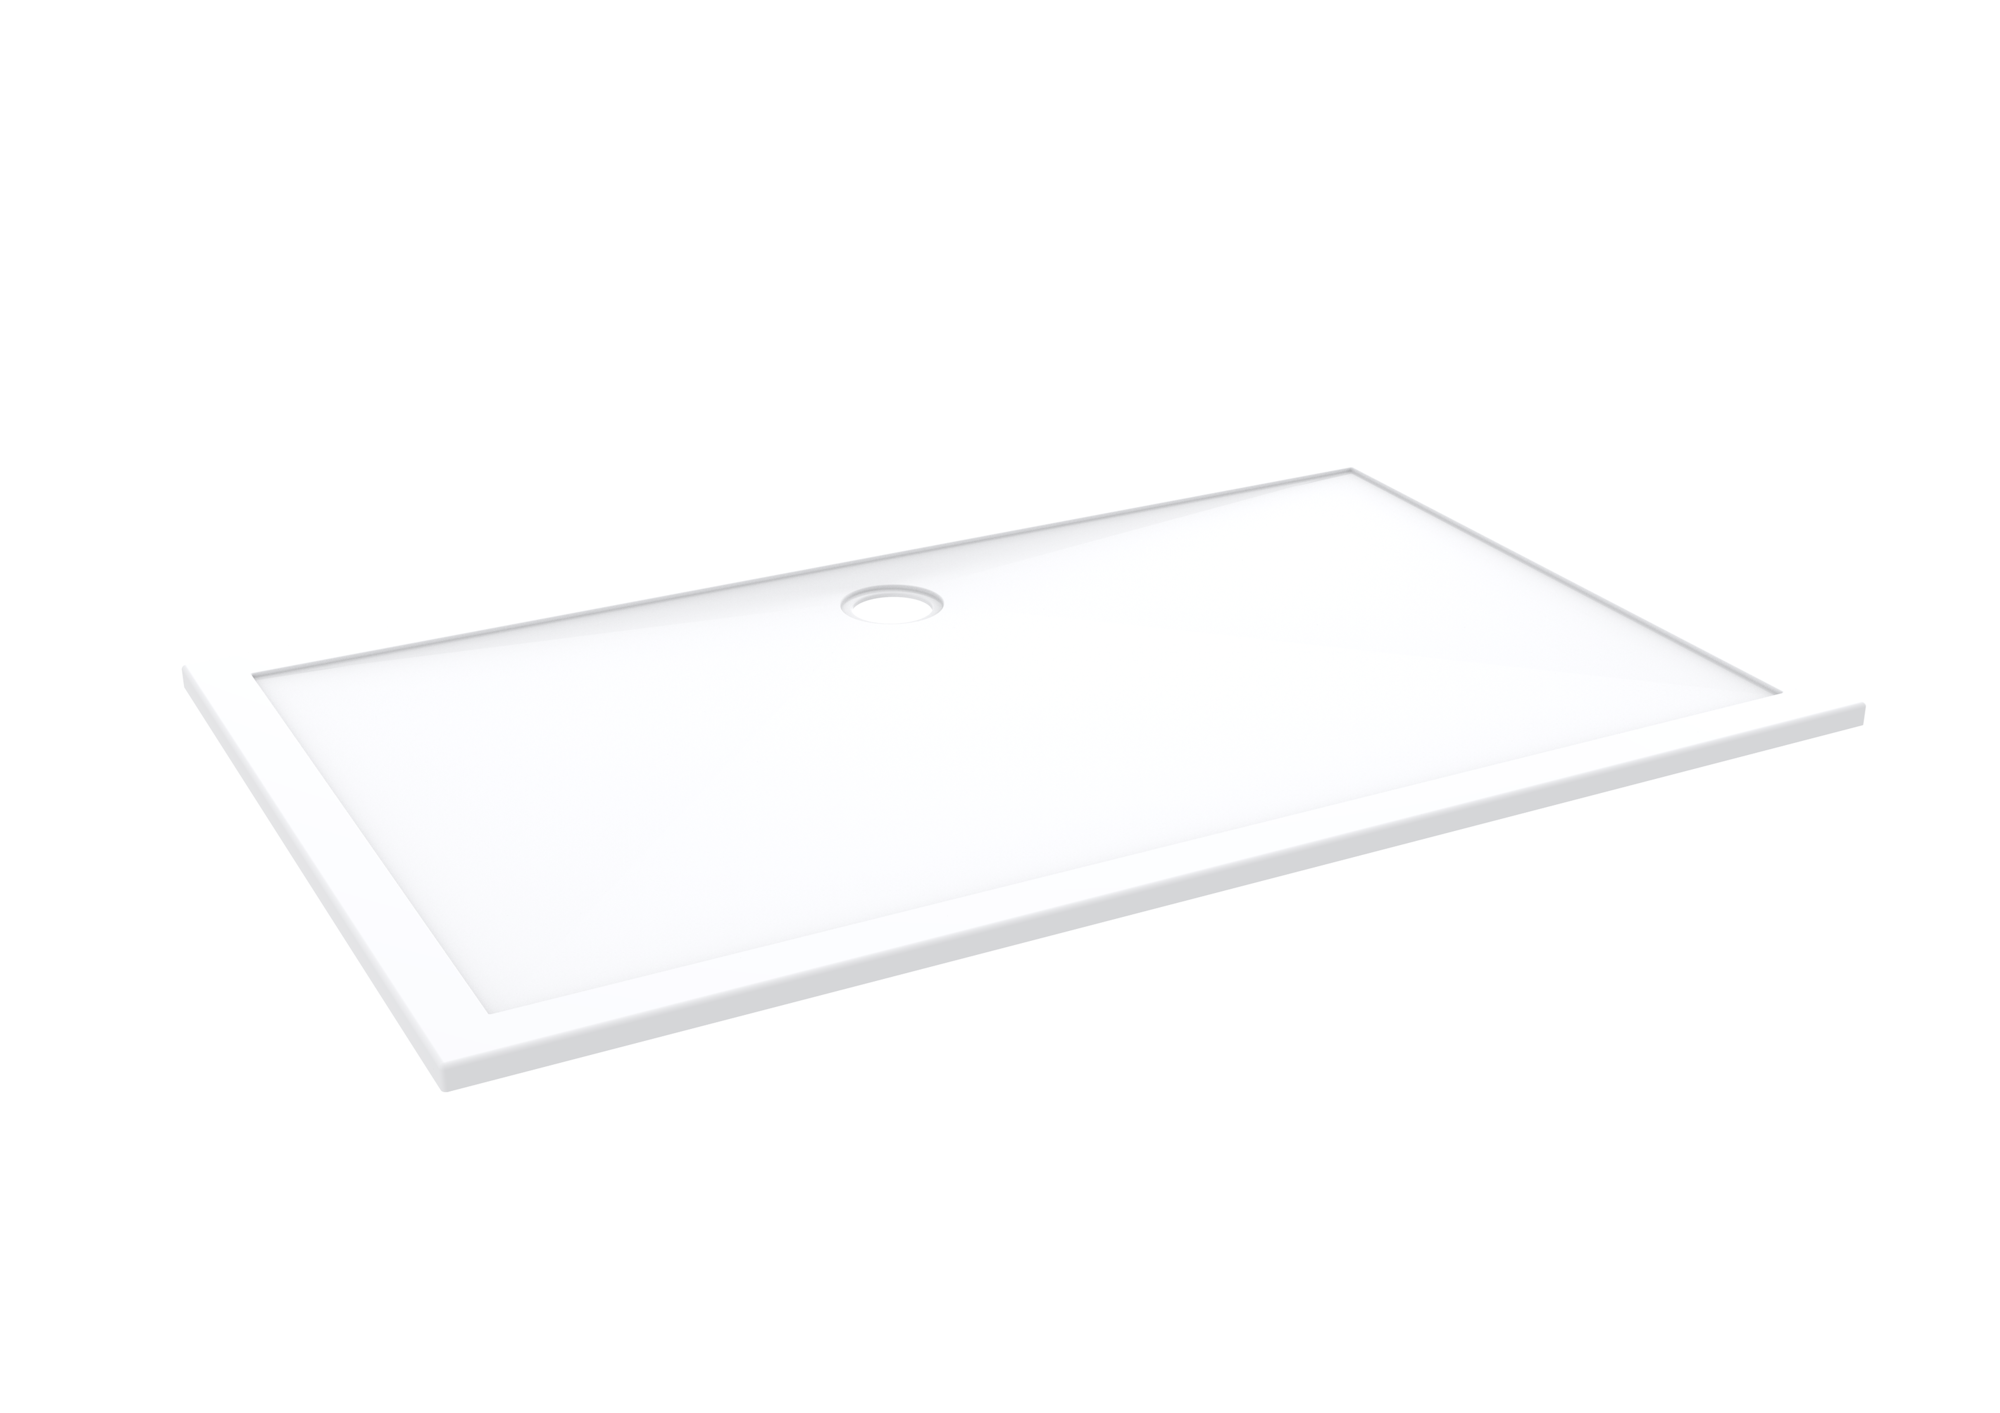 XE 1200x760mm shower tray